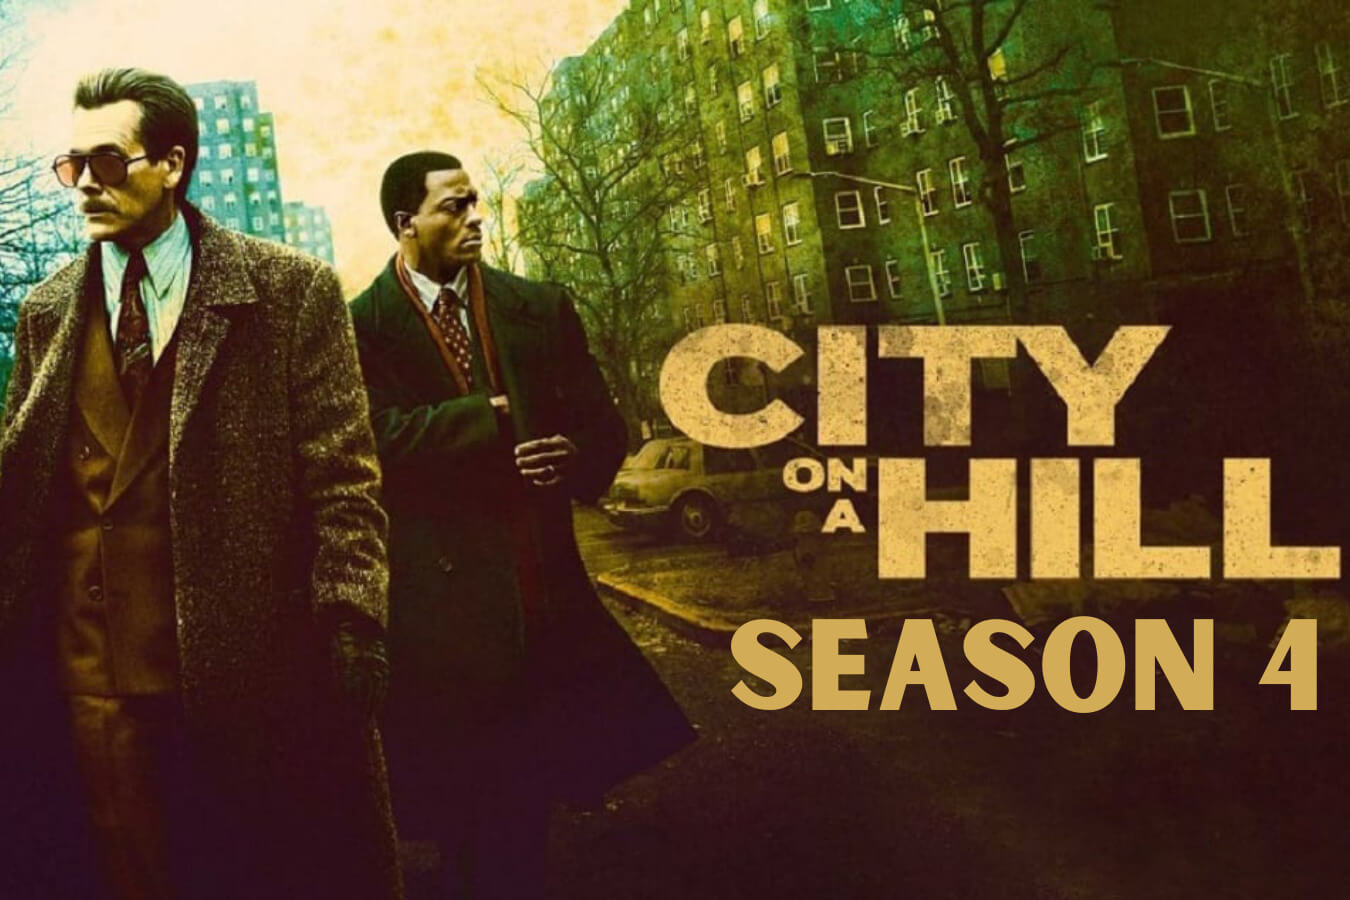 When was the original release date of City on a Hill?